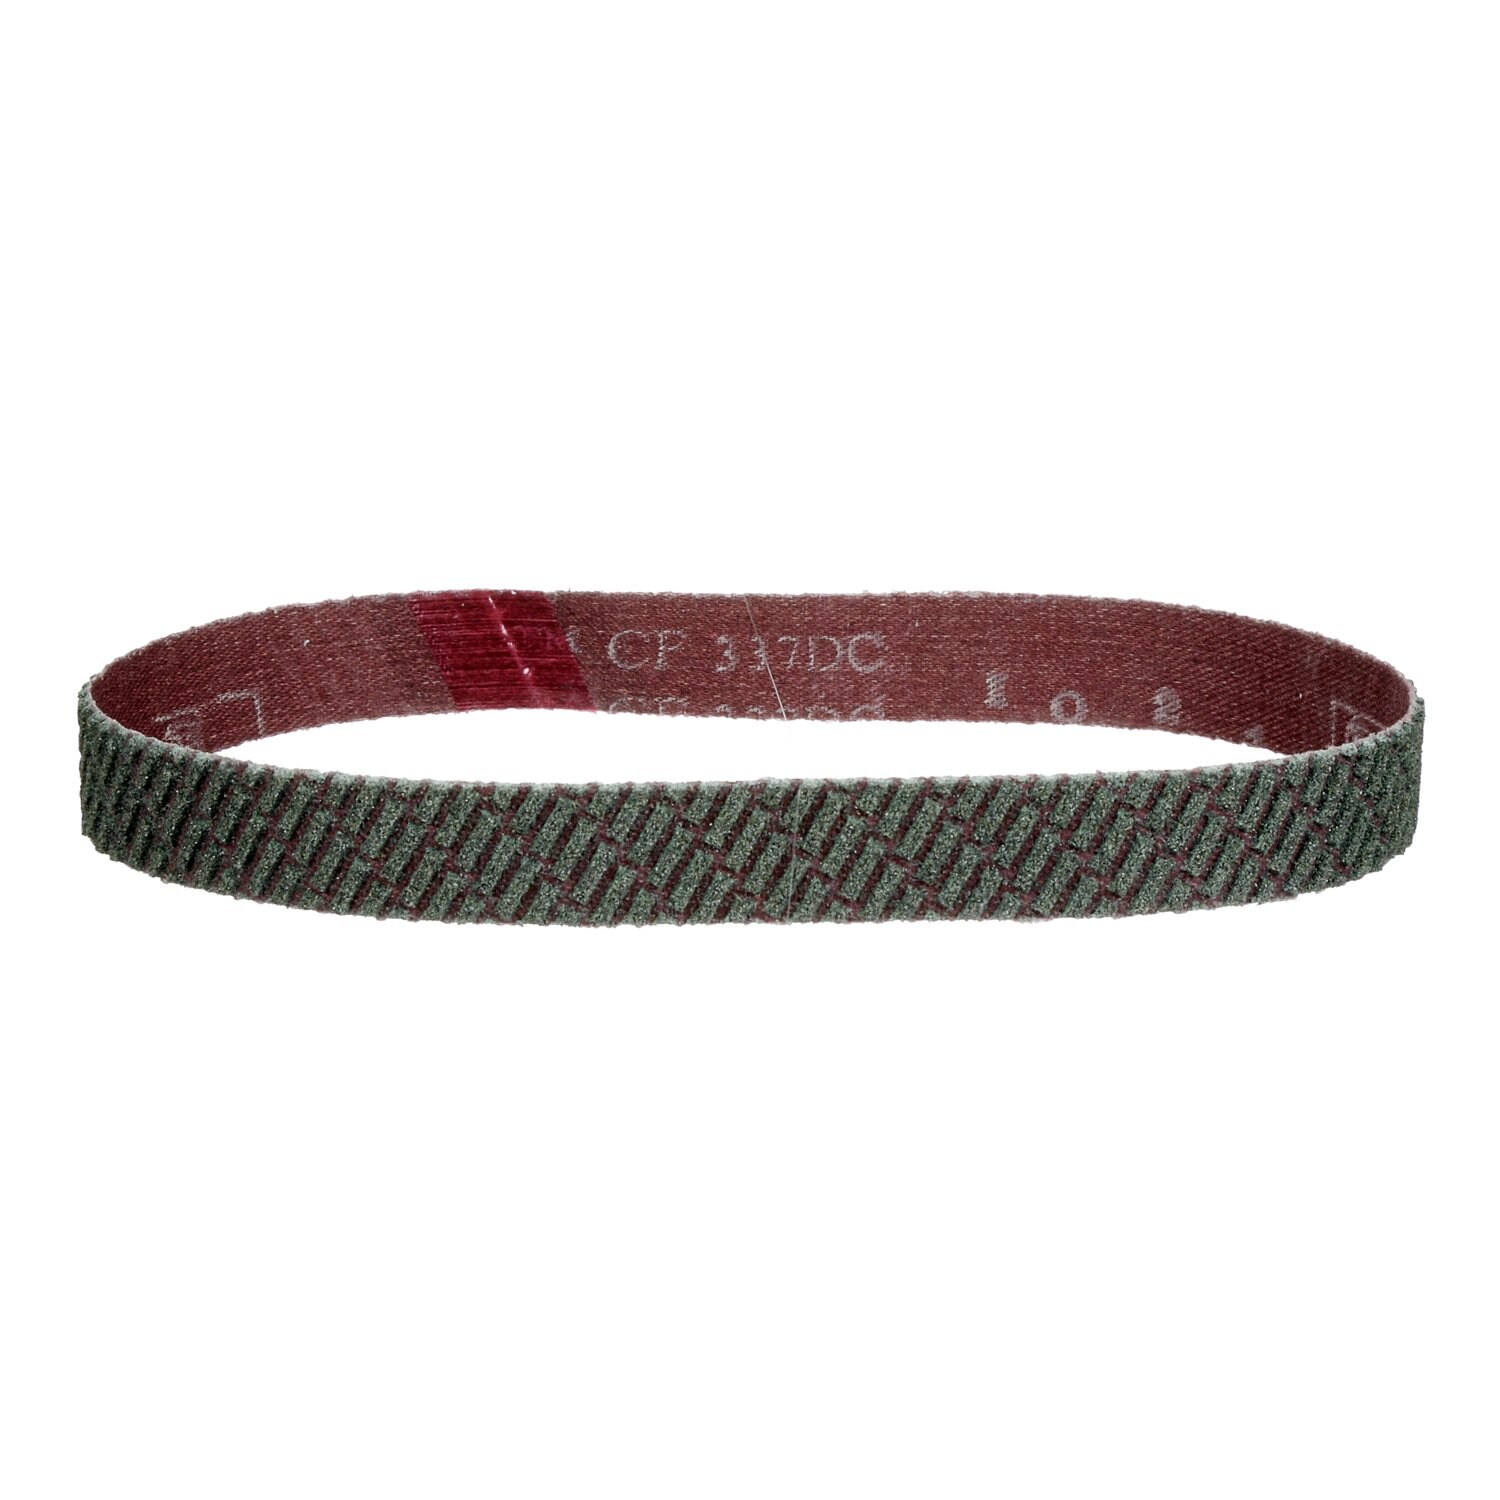 7010329163 - 3M Trizact Cloth Belt 337DC, 1/2 in X 18 in A45 X-weight, 20 ea/Case